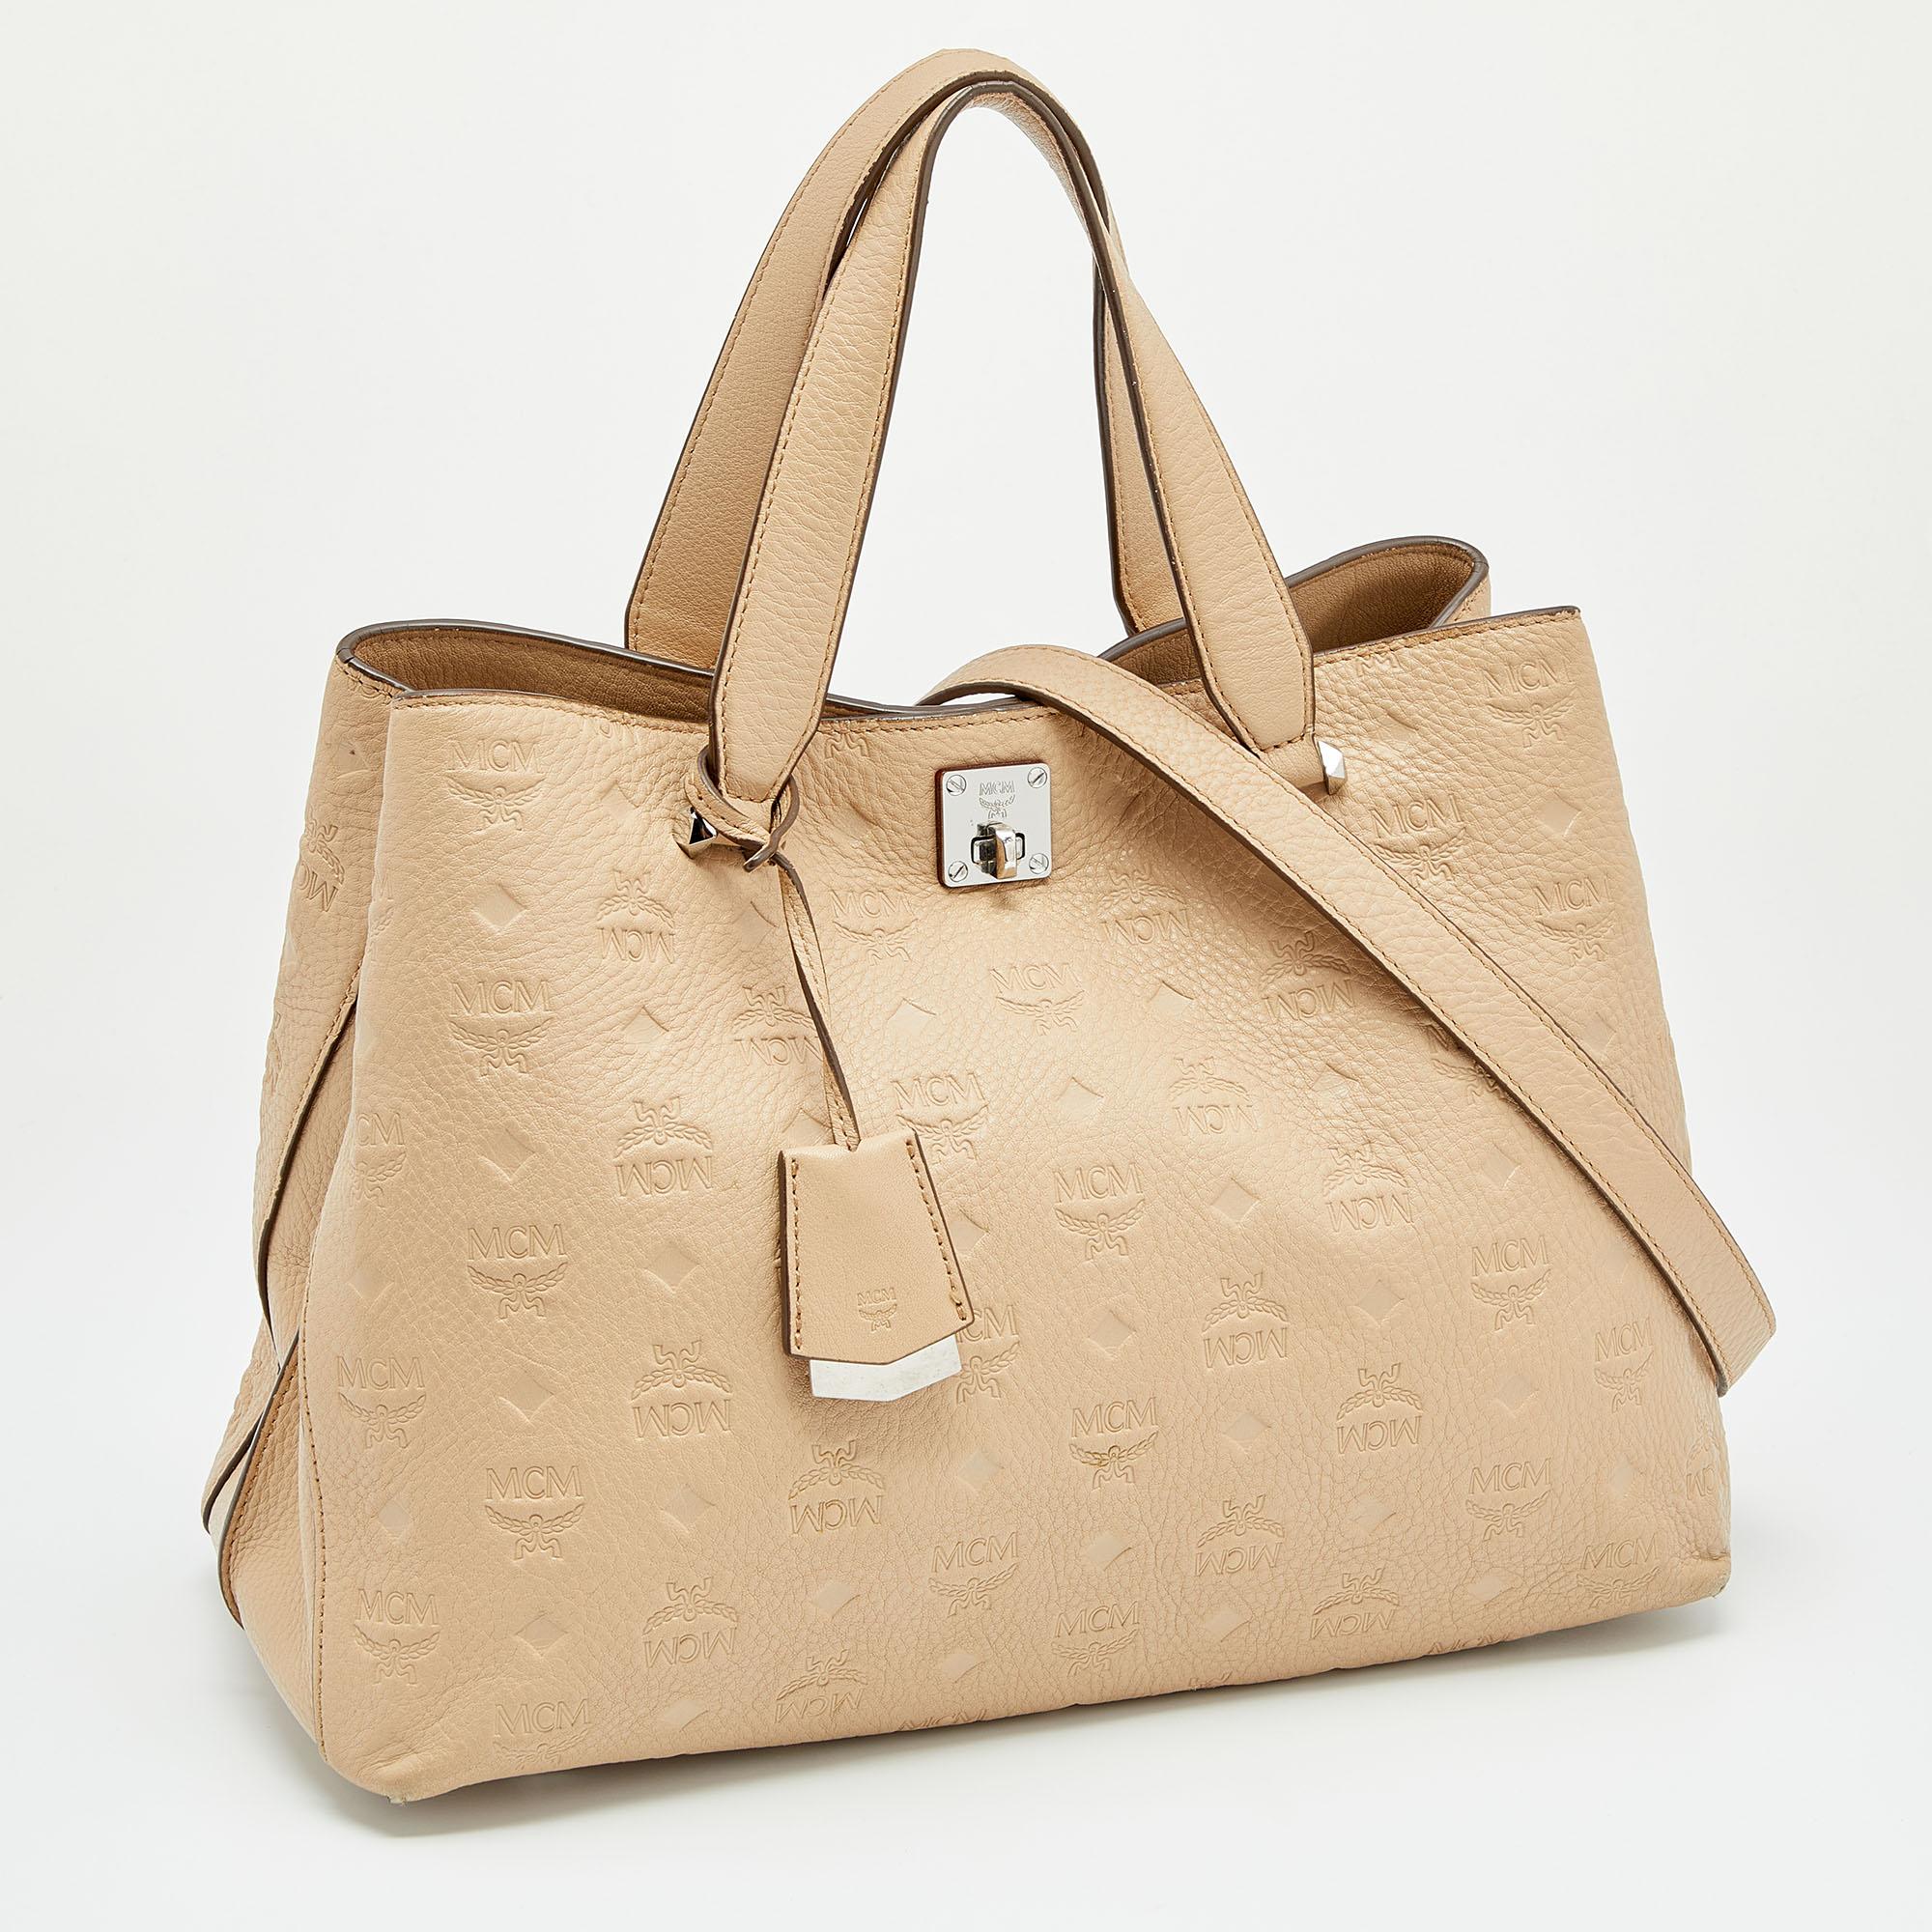 monogrammed leather tote